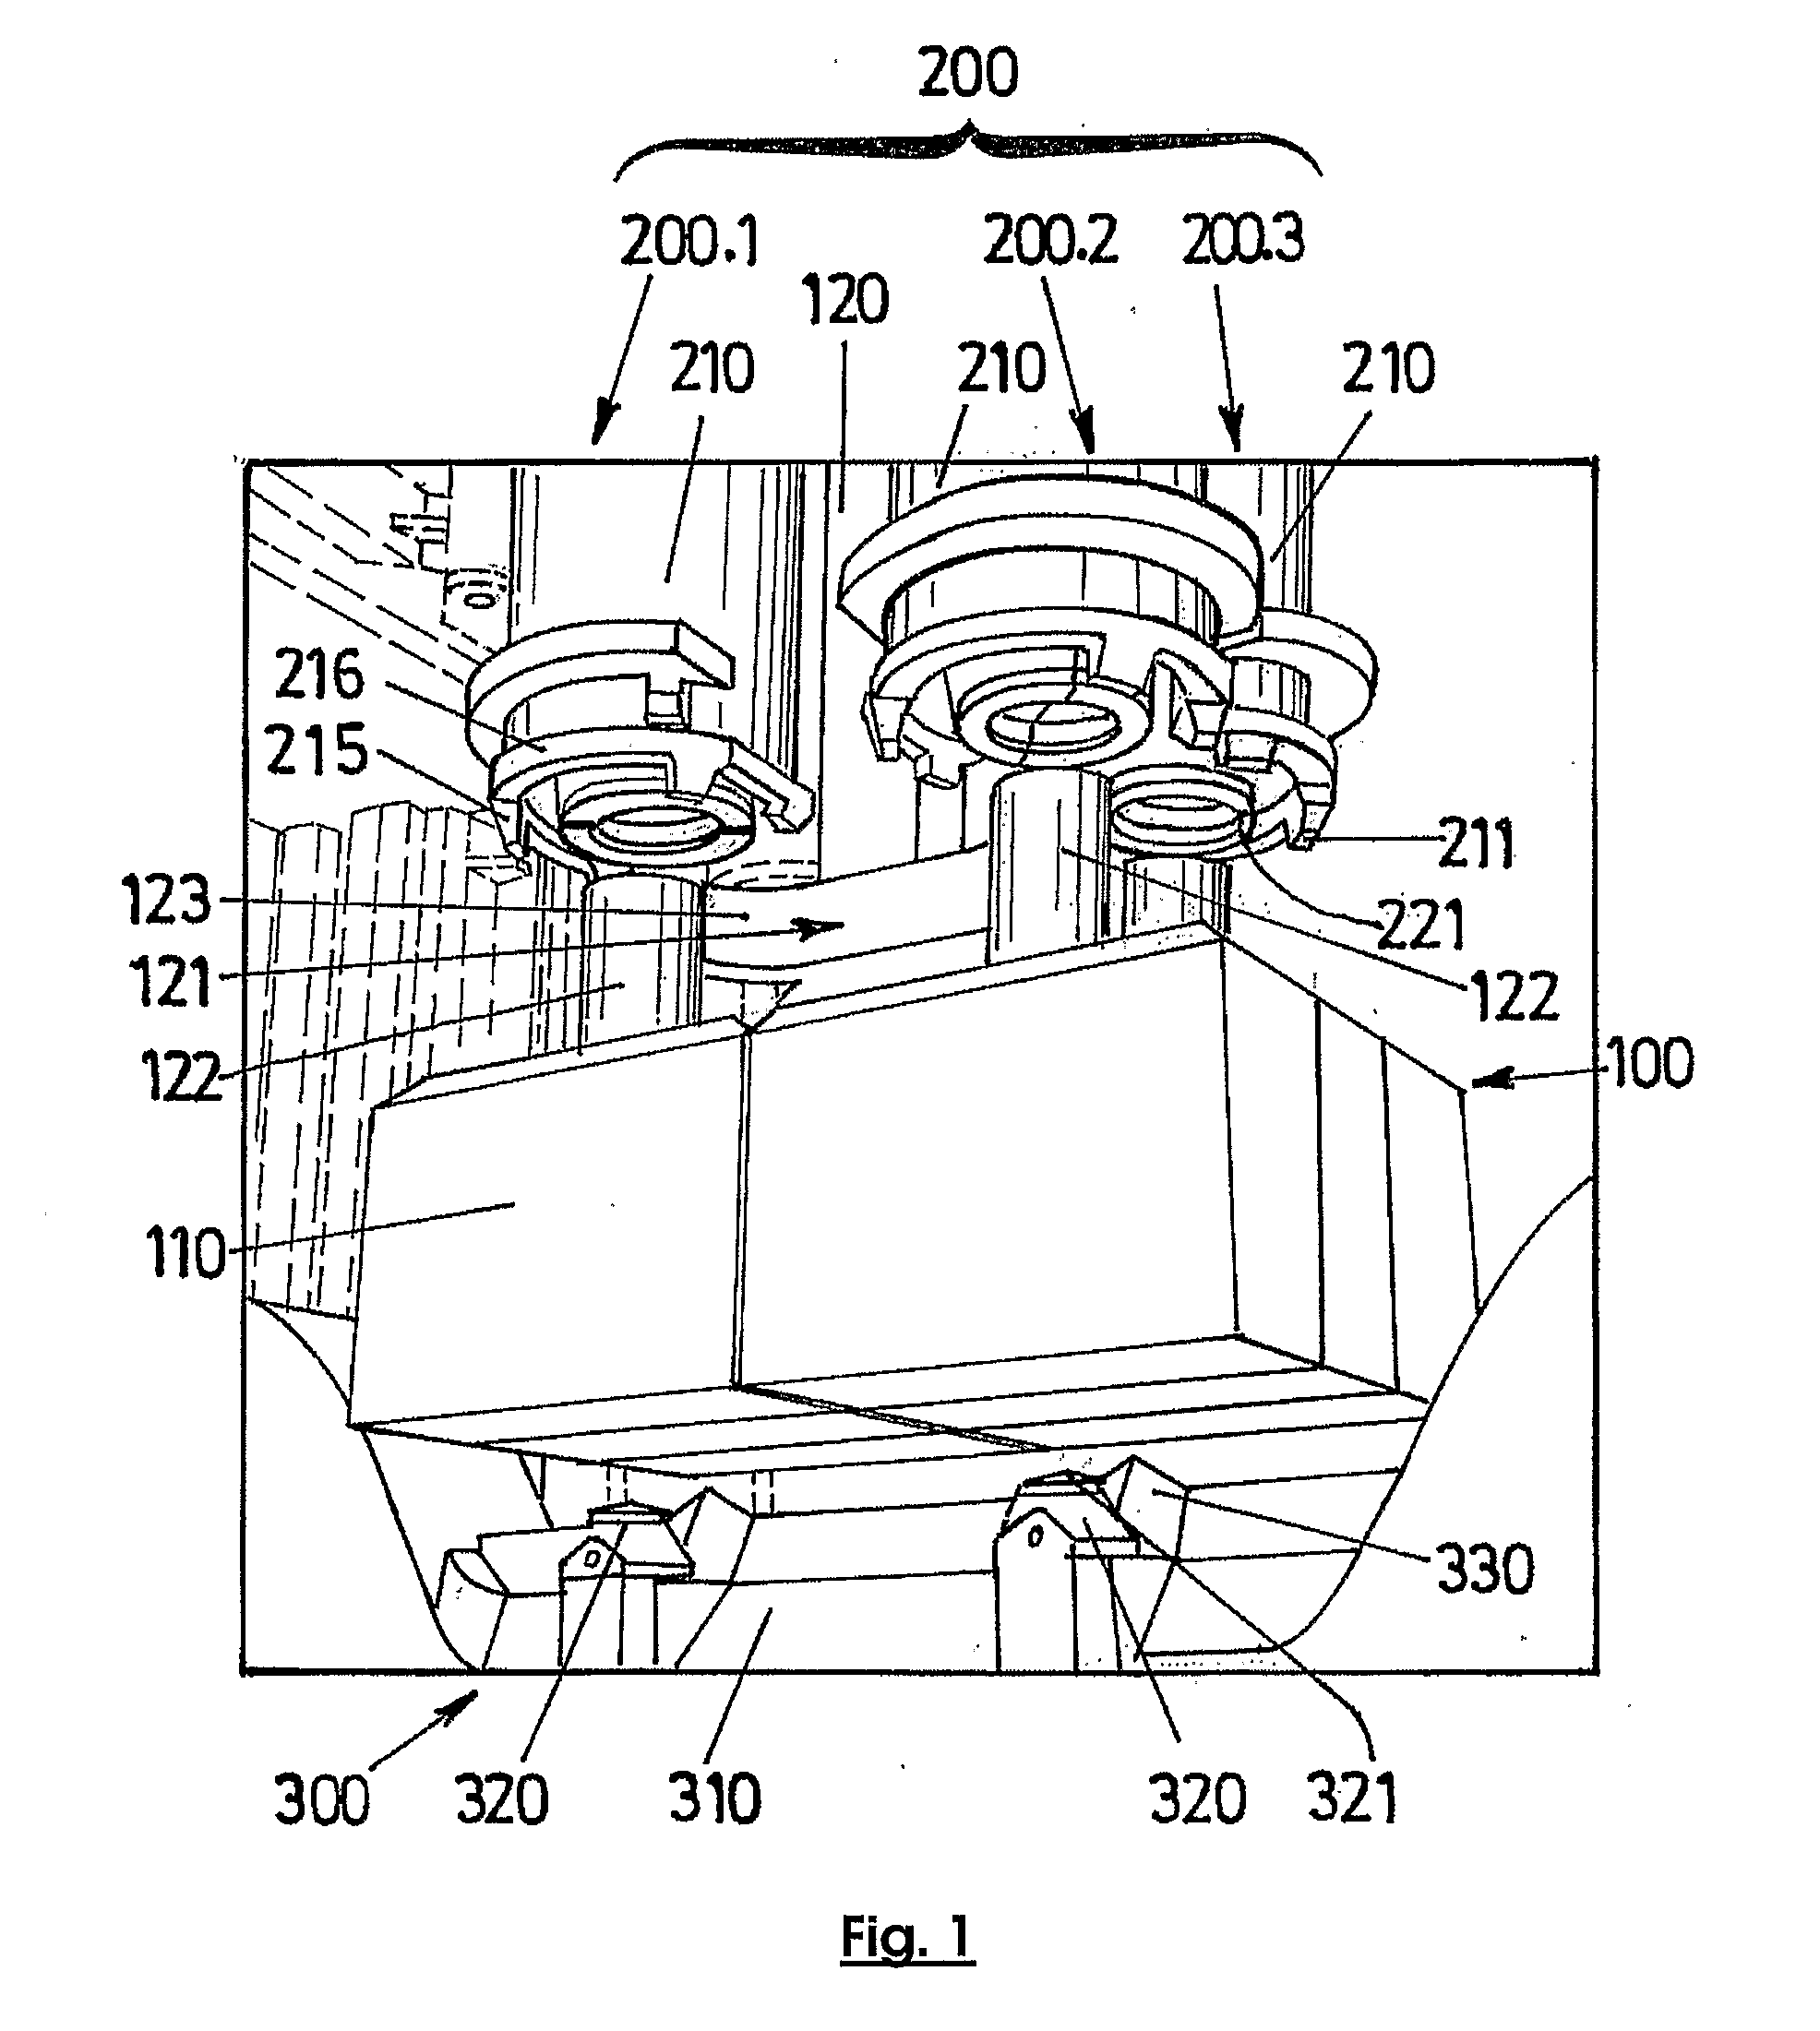 Method for Removing Anode Residues Attached to Spent Anodes Coming from Melt Bath Electrolysis Potlines